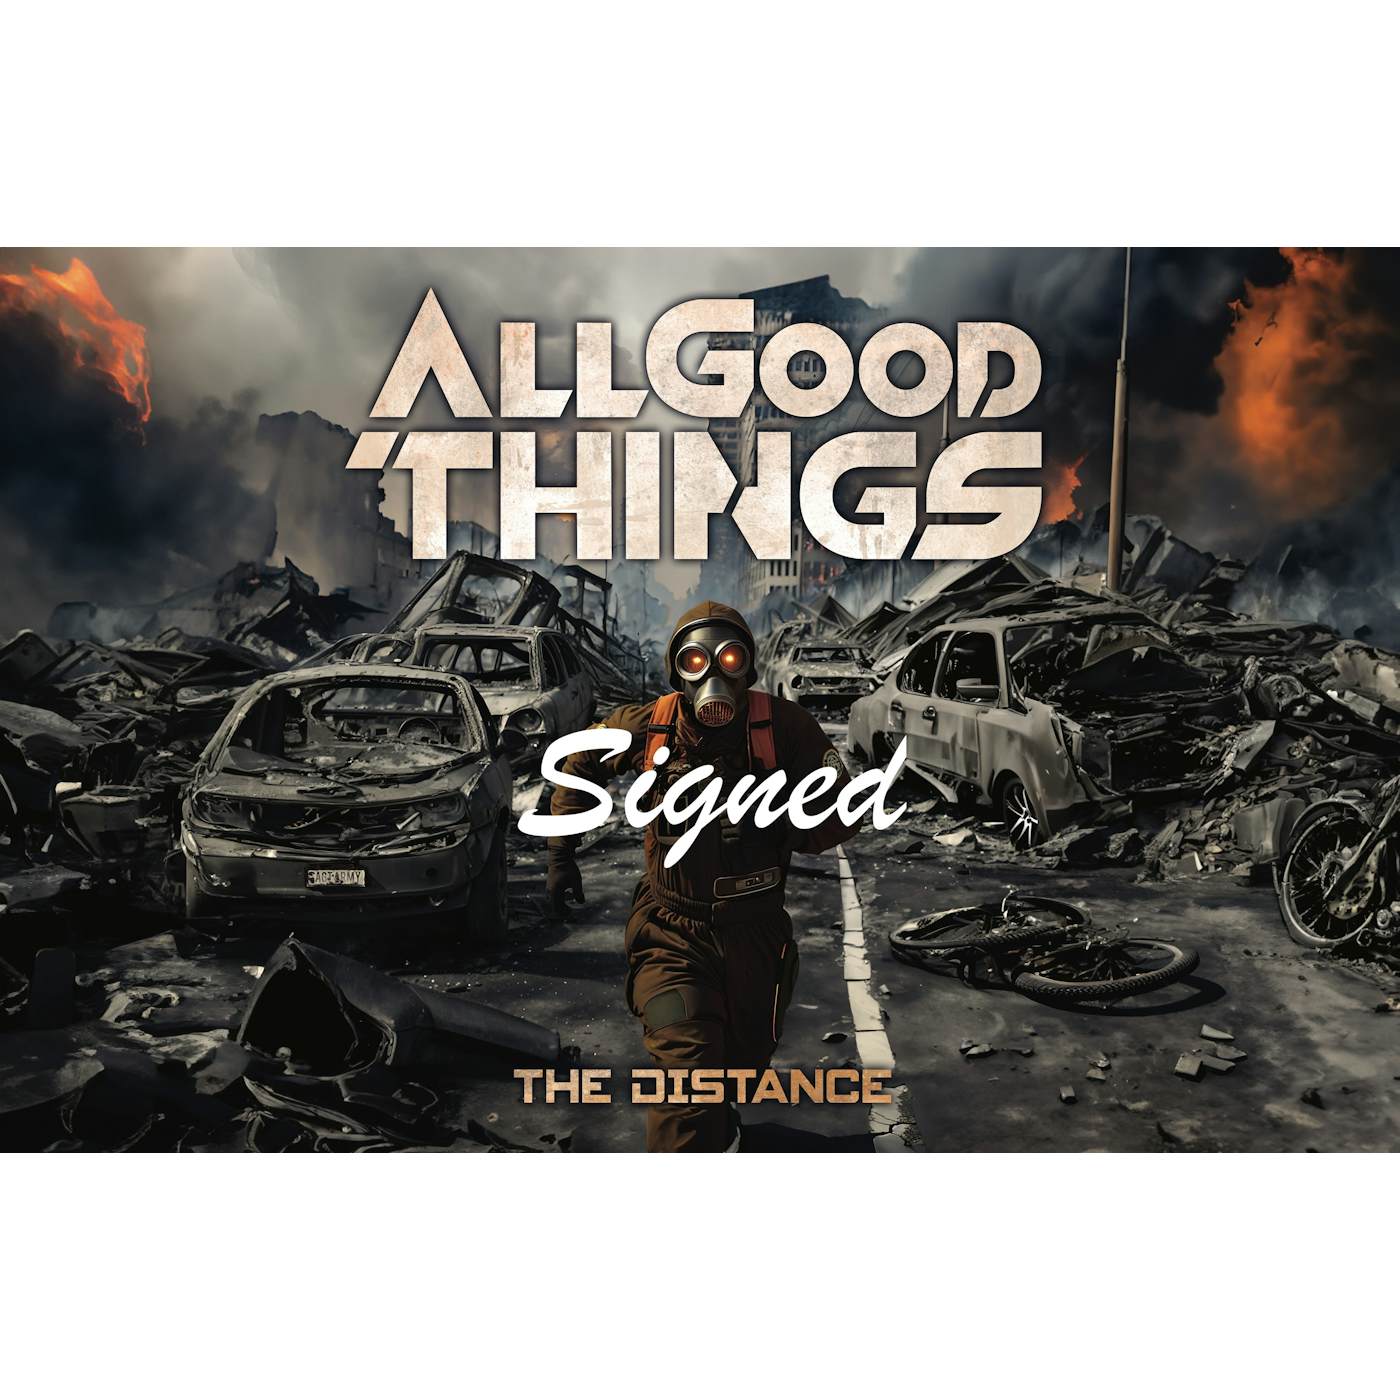 ALL GOOD THINGS - "THE DISTANCE" POSTER **SIGNED**